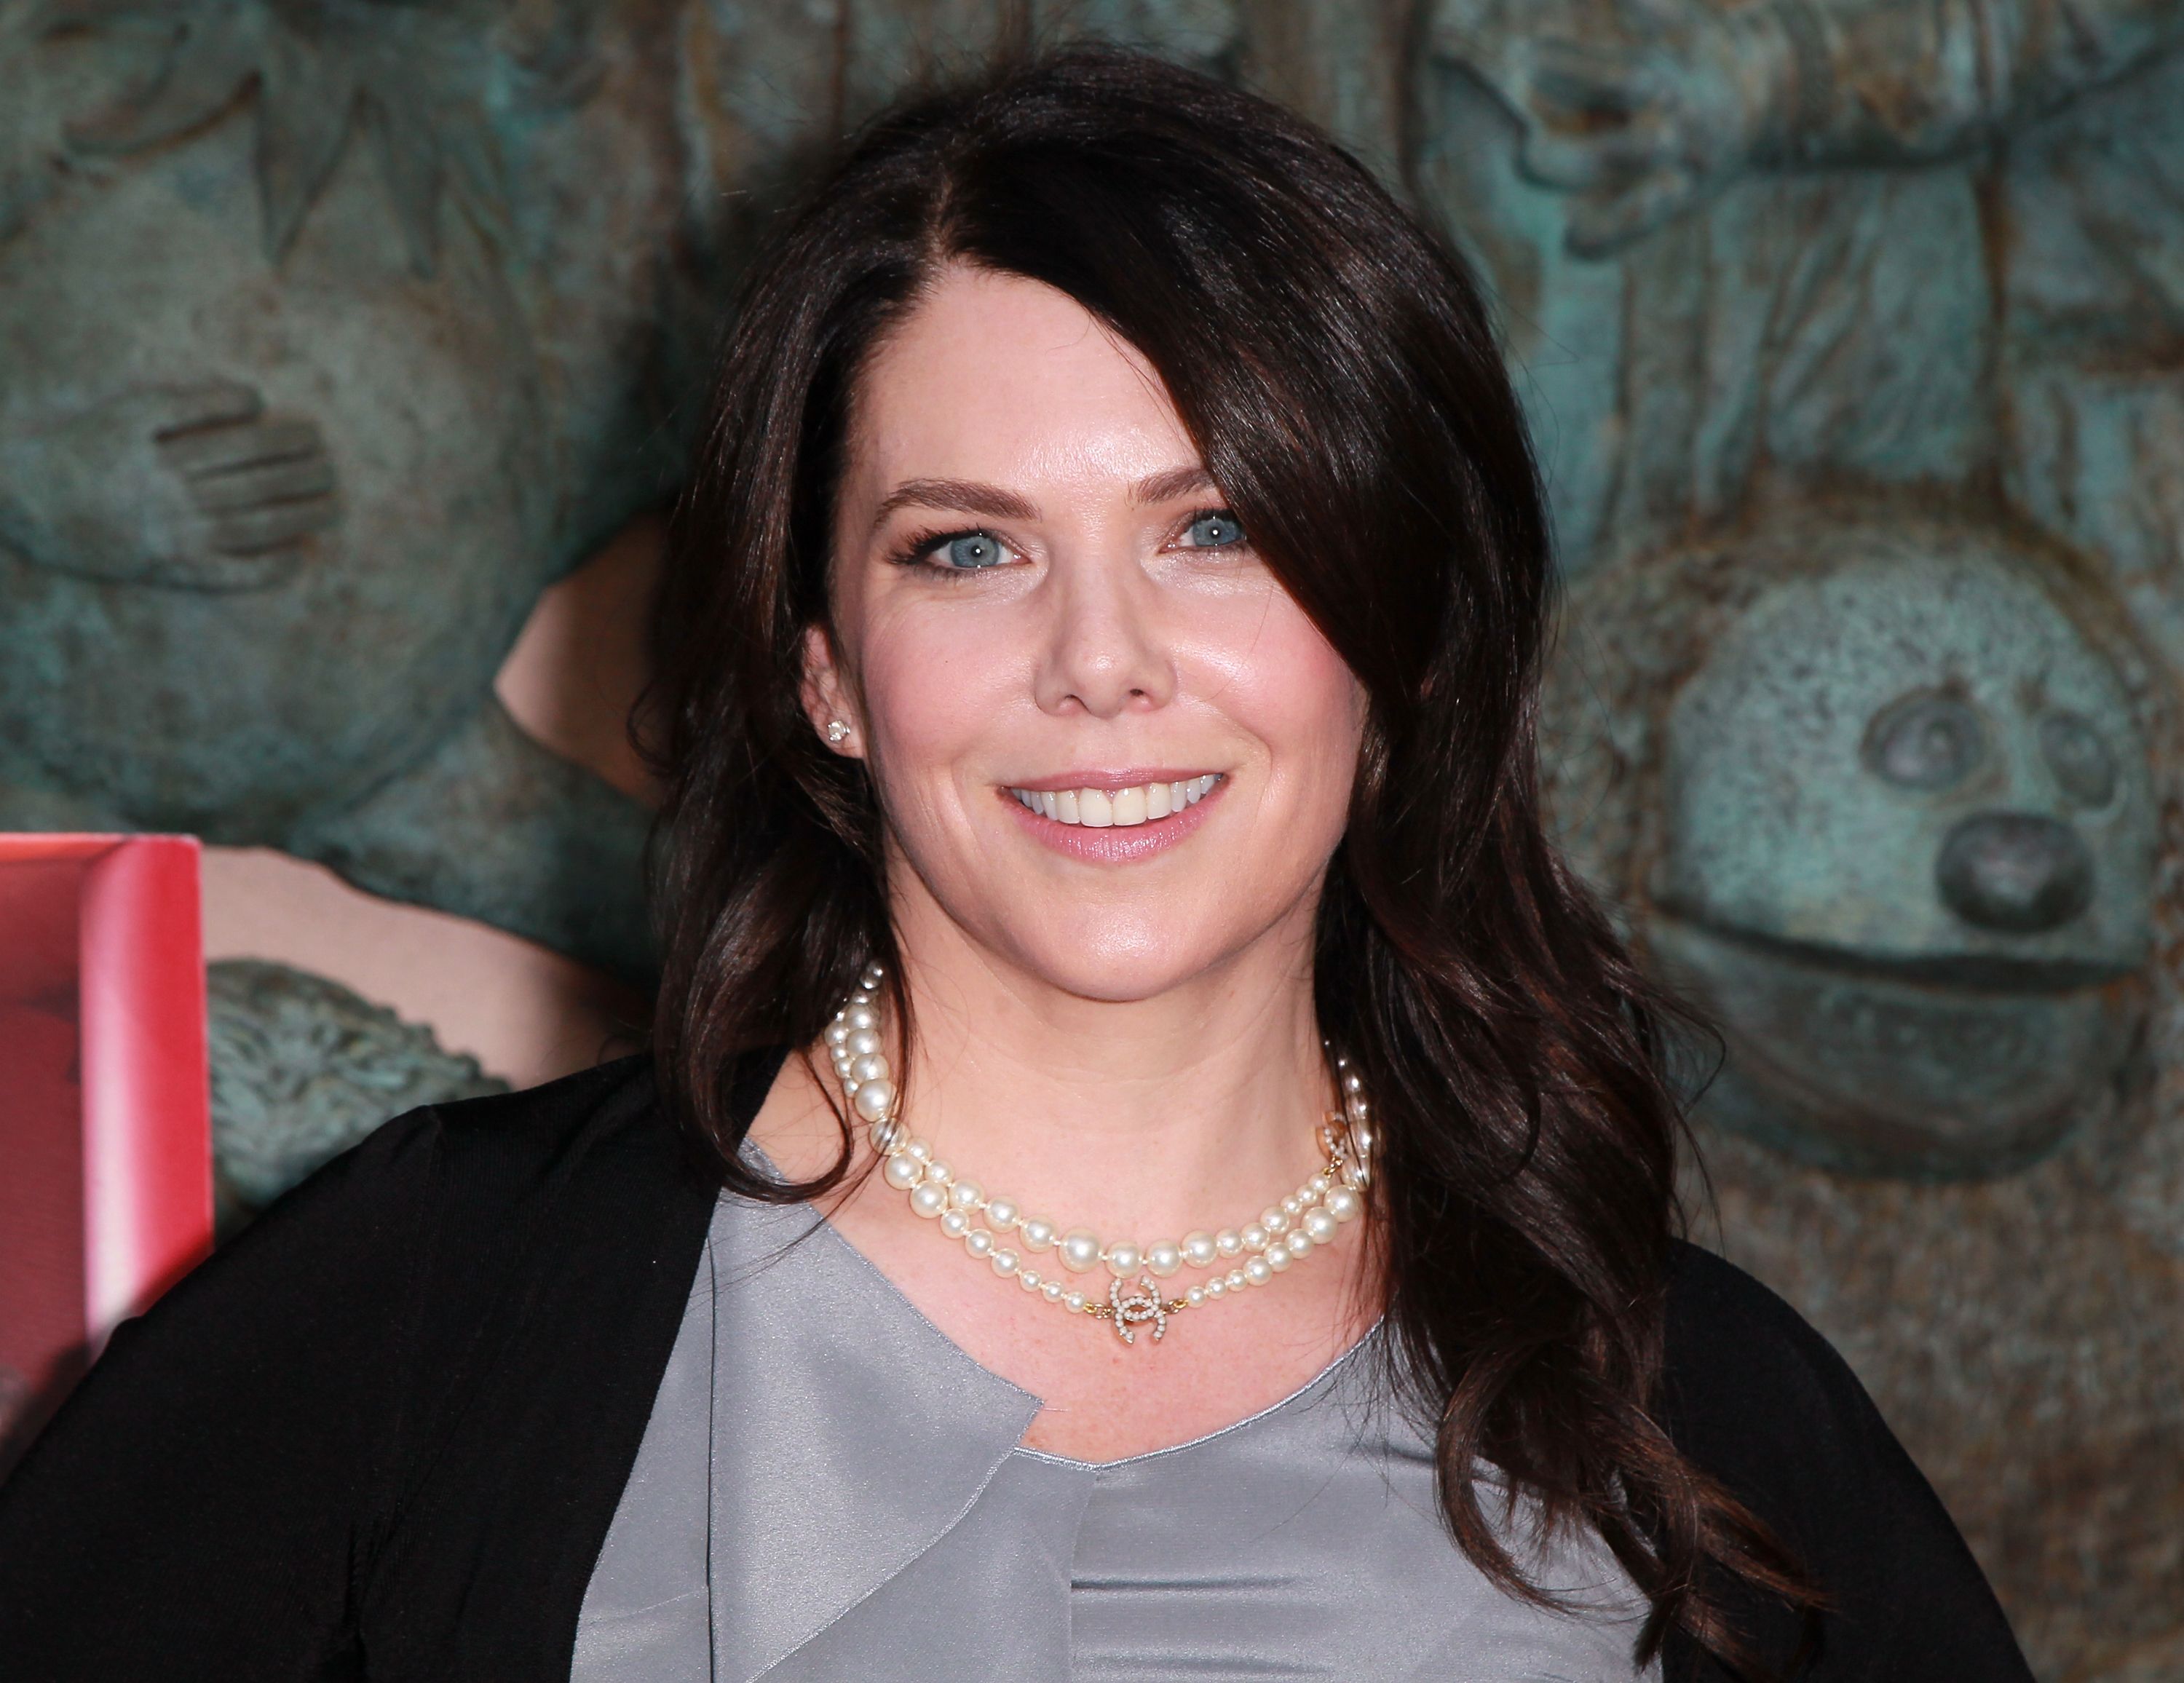 Lauren Graham at the screening of "Parenthood" in 2011 in North Hollywood, California | Source: Getty Images